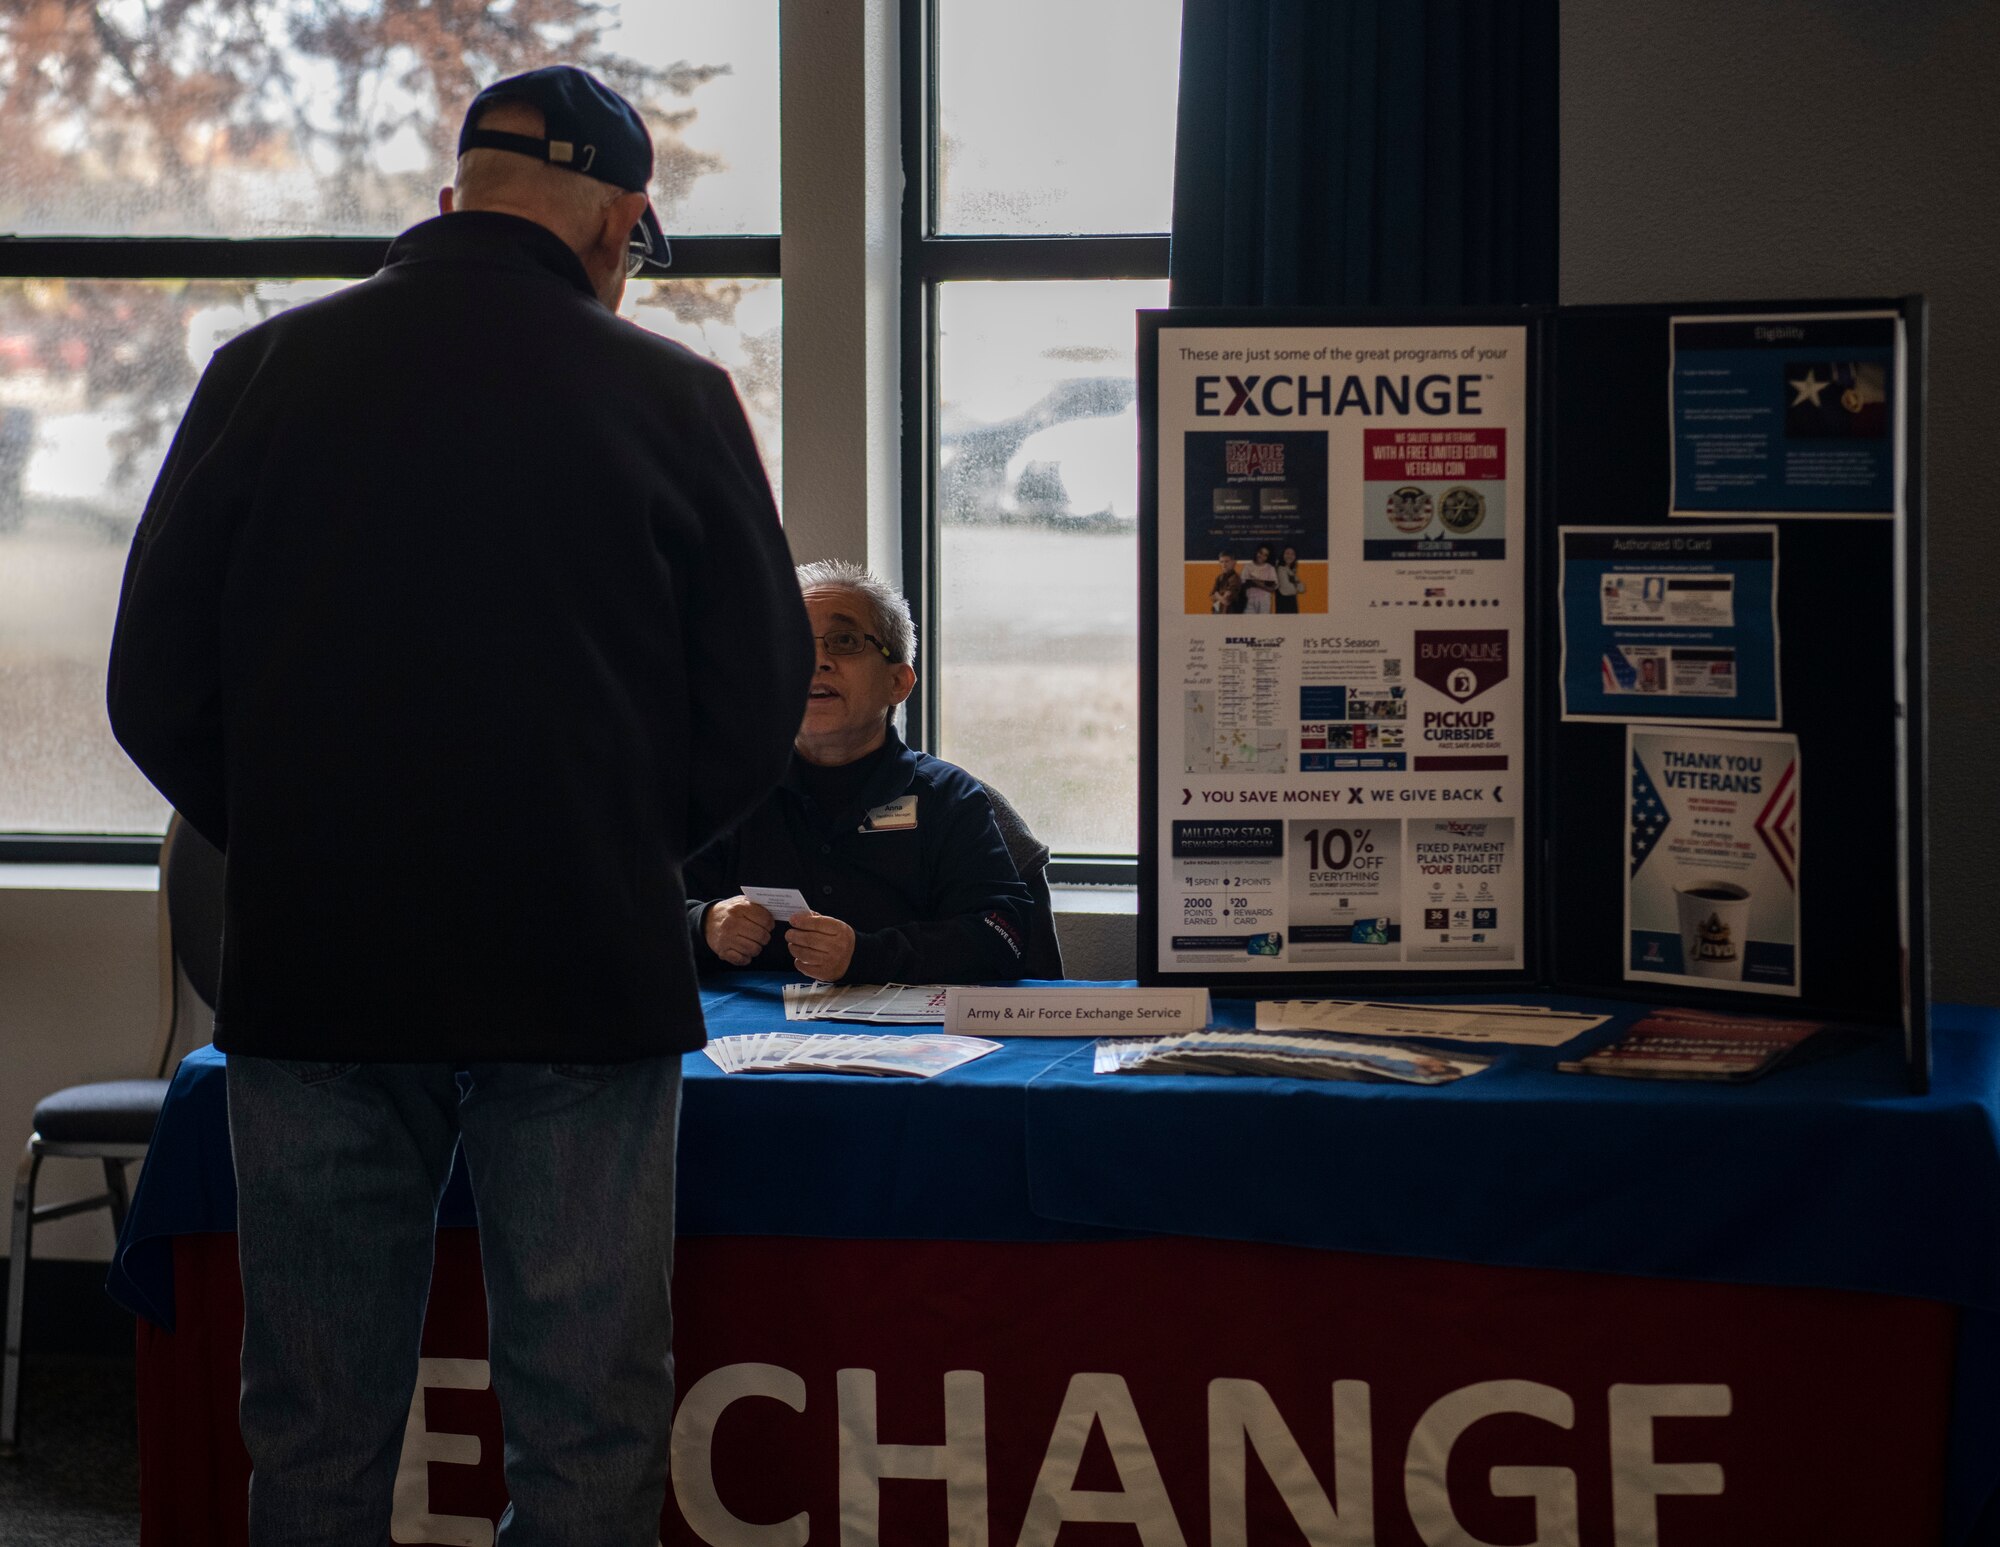 This venue featured several information booths from agencies throughout the Wing to demonstrate the 9th Reconnaissance Wing's commitment to and appreciation for our retired military community and their families throughout our local area.